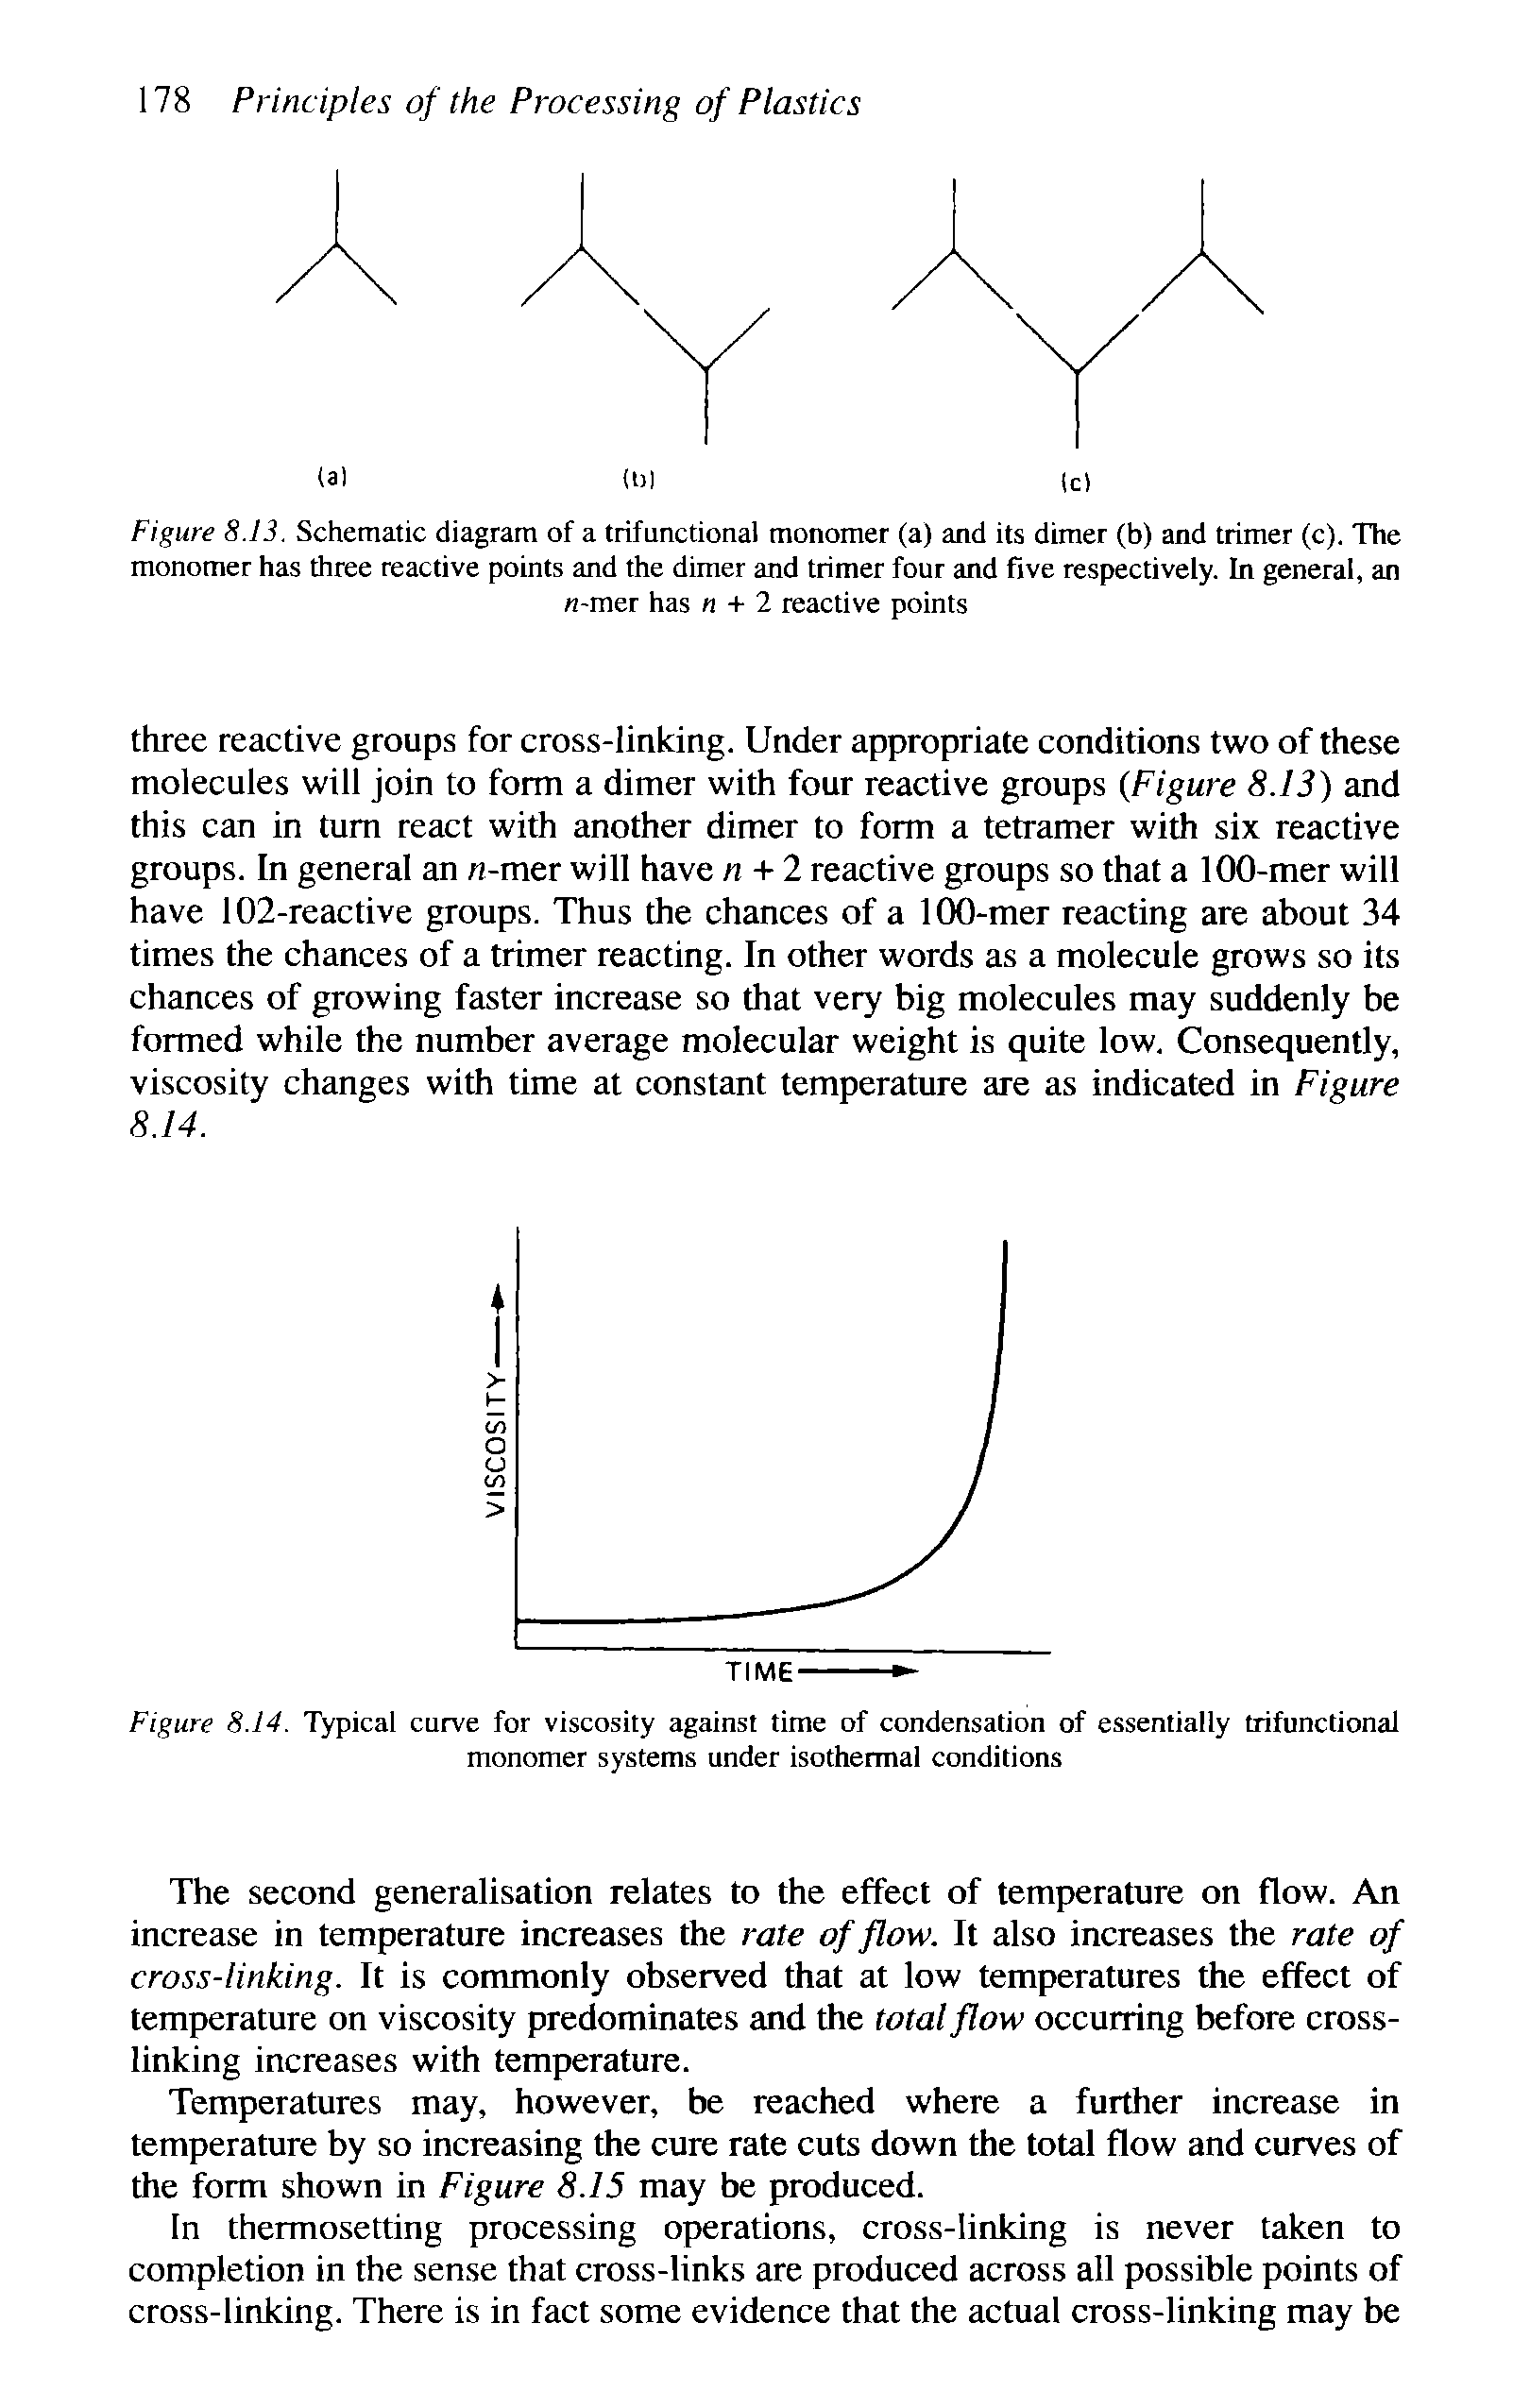 Figure 8.14. Typical curve for viscosity against time of condensation of essentially trifunctional monomer systems under isothermal conditions...